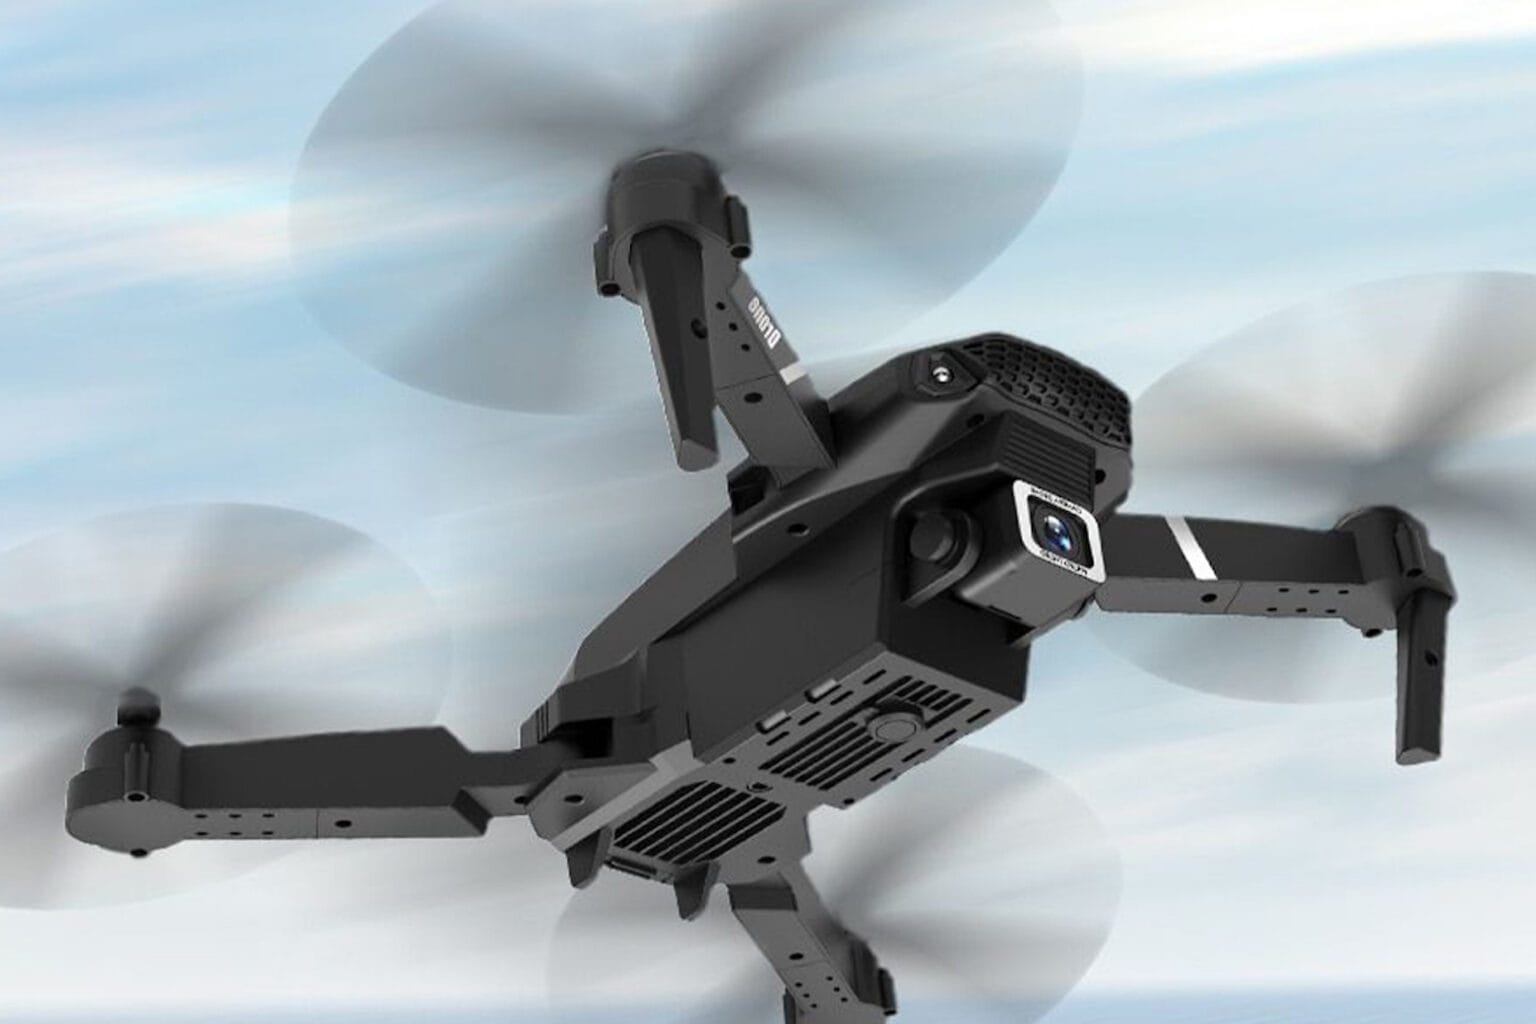 Take your photography to new heights with this awesome HD camera drone, less than $75 today.